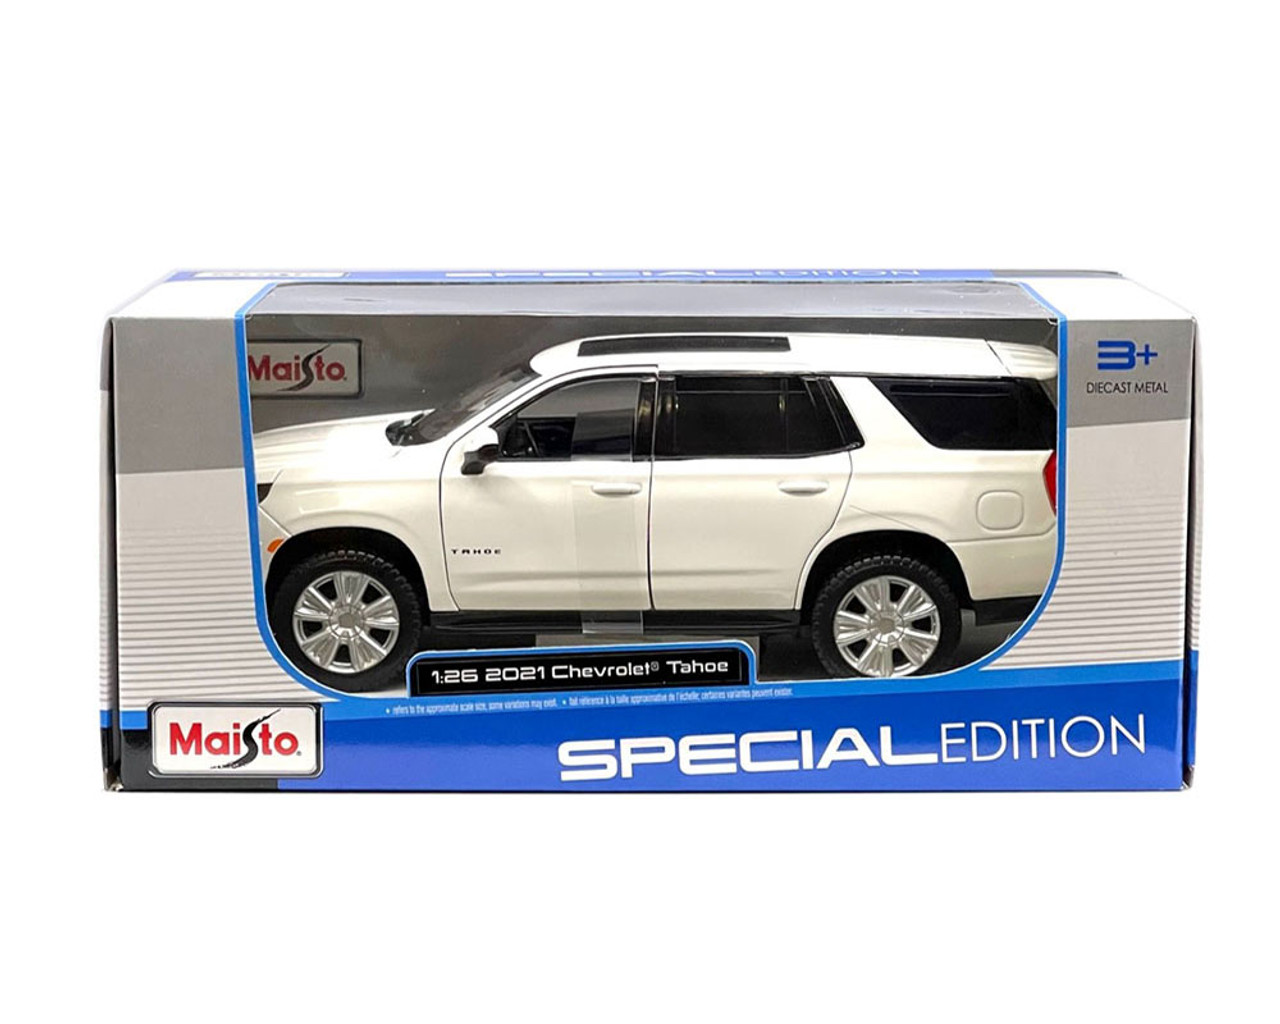 2021 CHEVROLET TAHOE WHITE 1/26 SCALE DIECAST CAR MODEL BY MAISTO